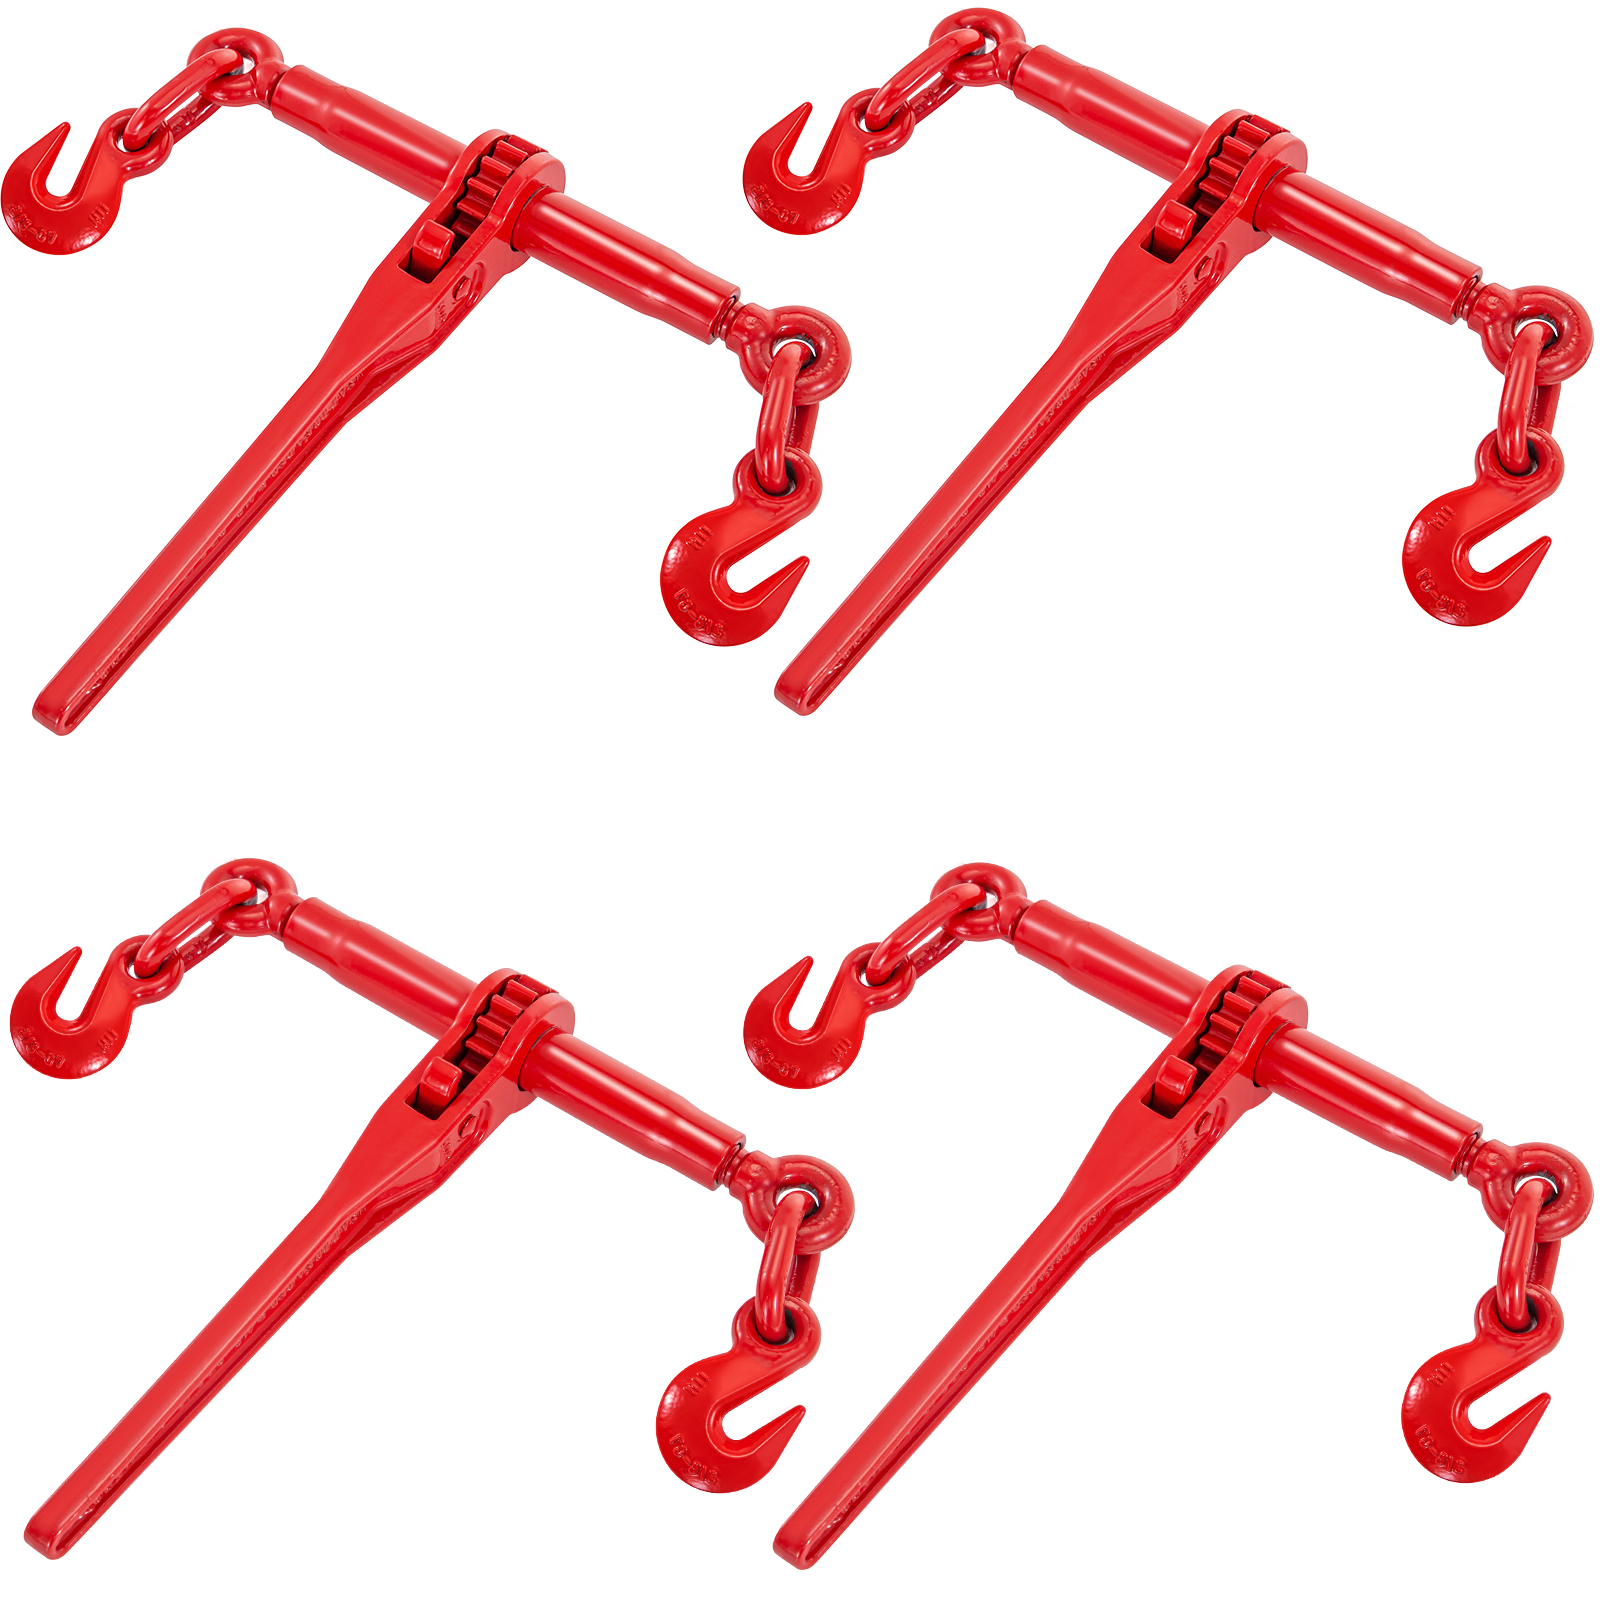 Vevor Chain Binder Ratchet Load Binder 3/8in-1/2in 9215lbs For Tie Down 4pack от Vevor Many GEOs